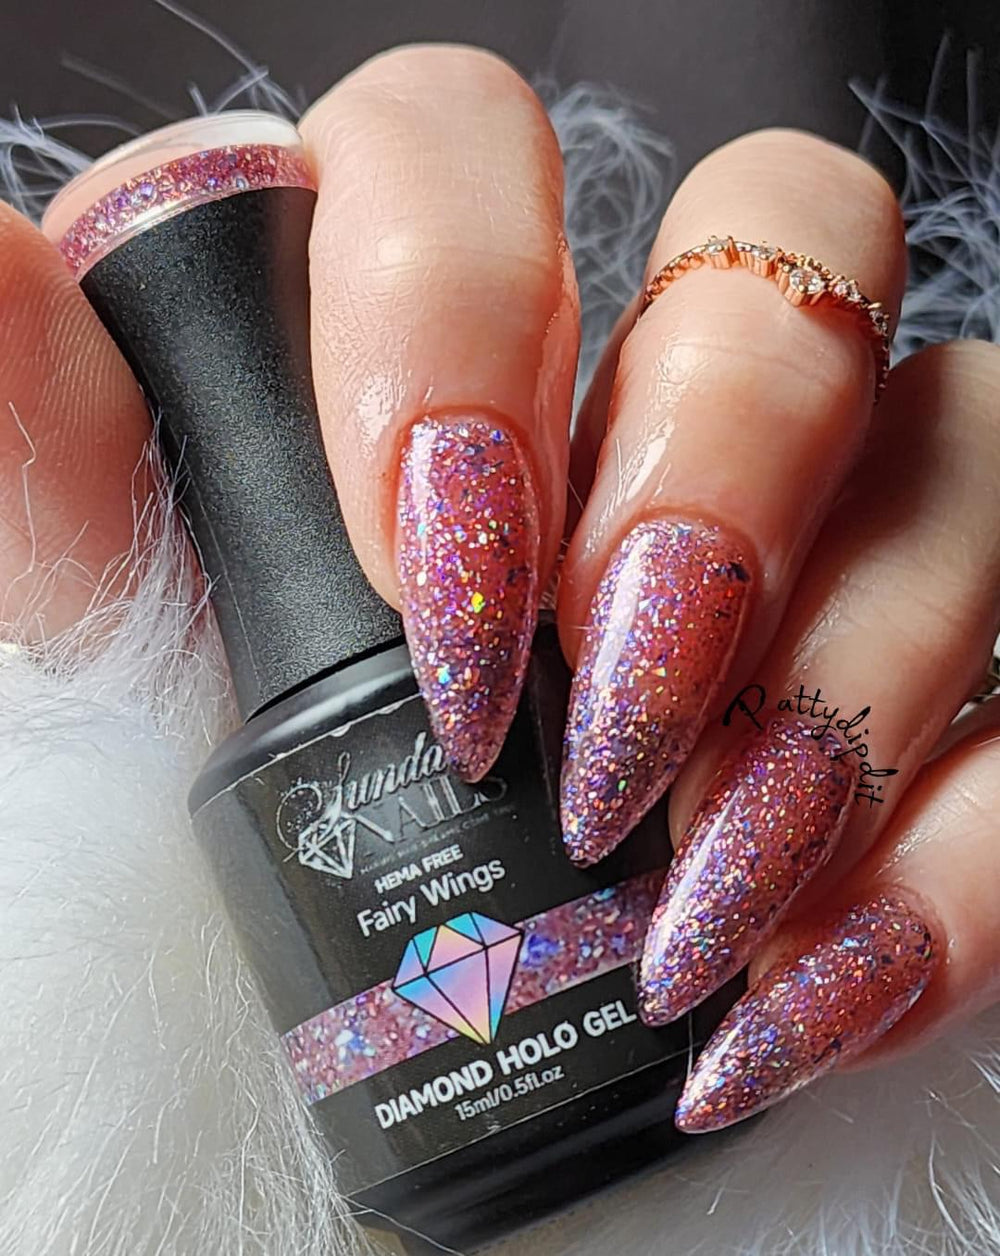 Fairy Wings (Holographic Gel Glitter)